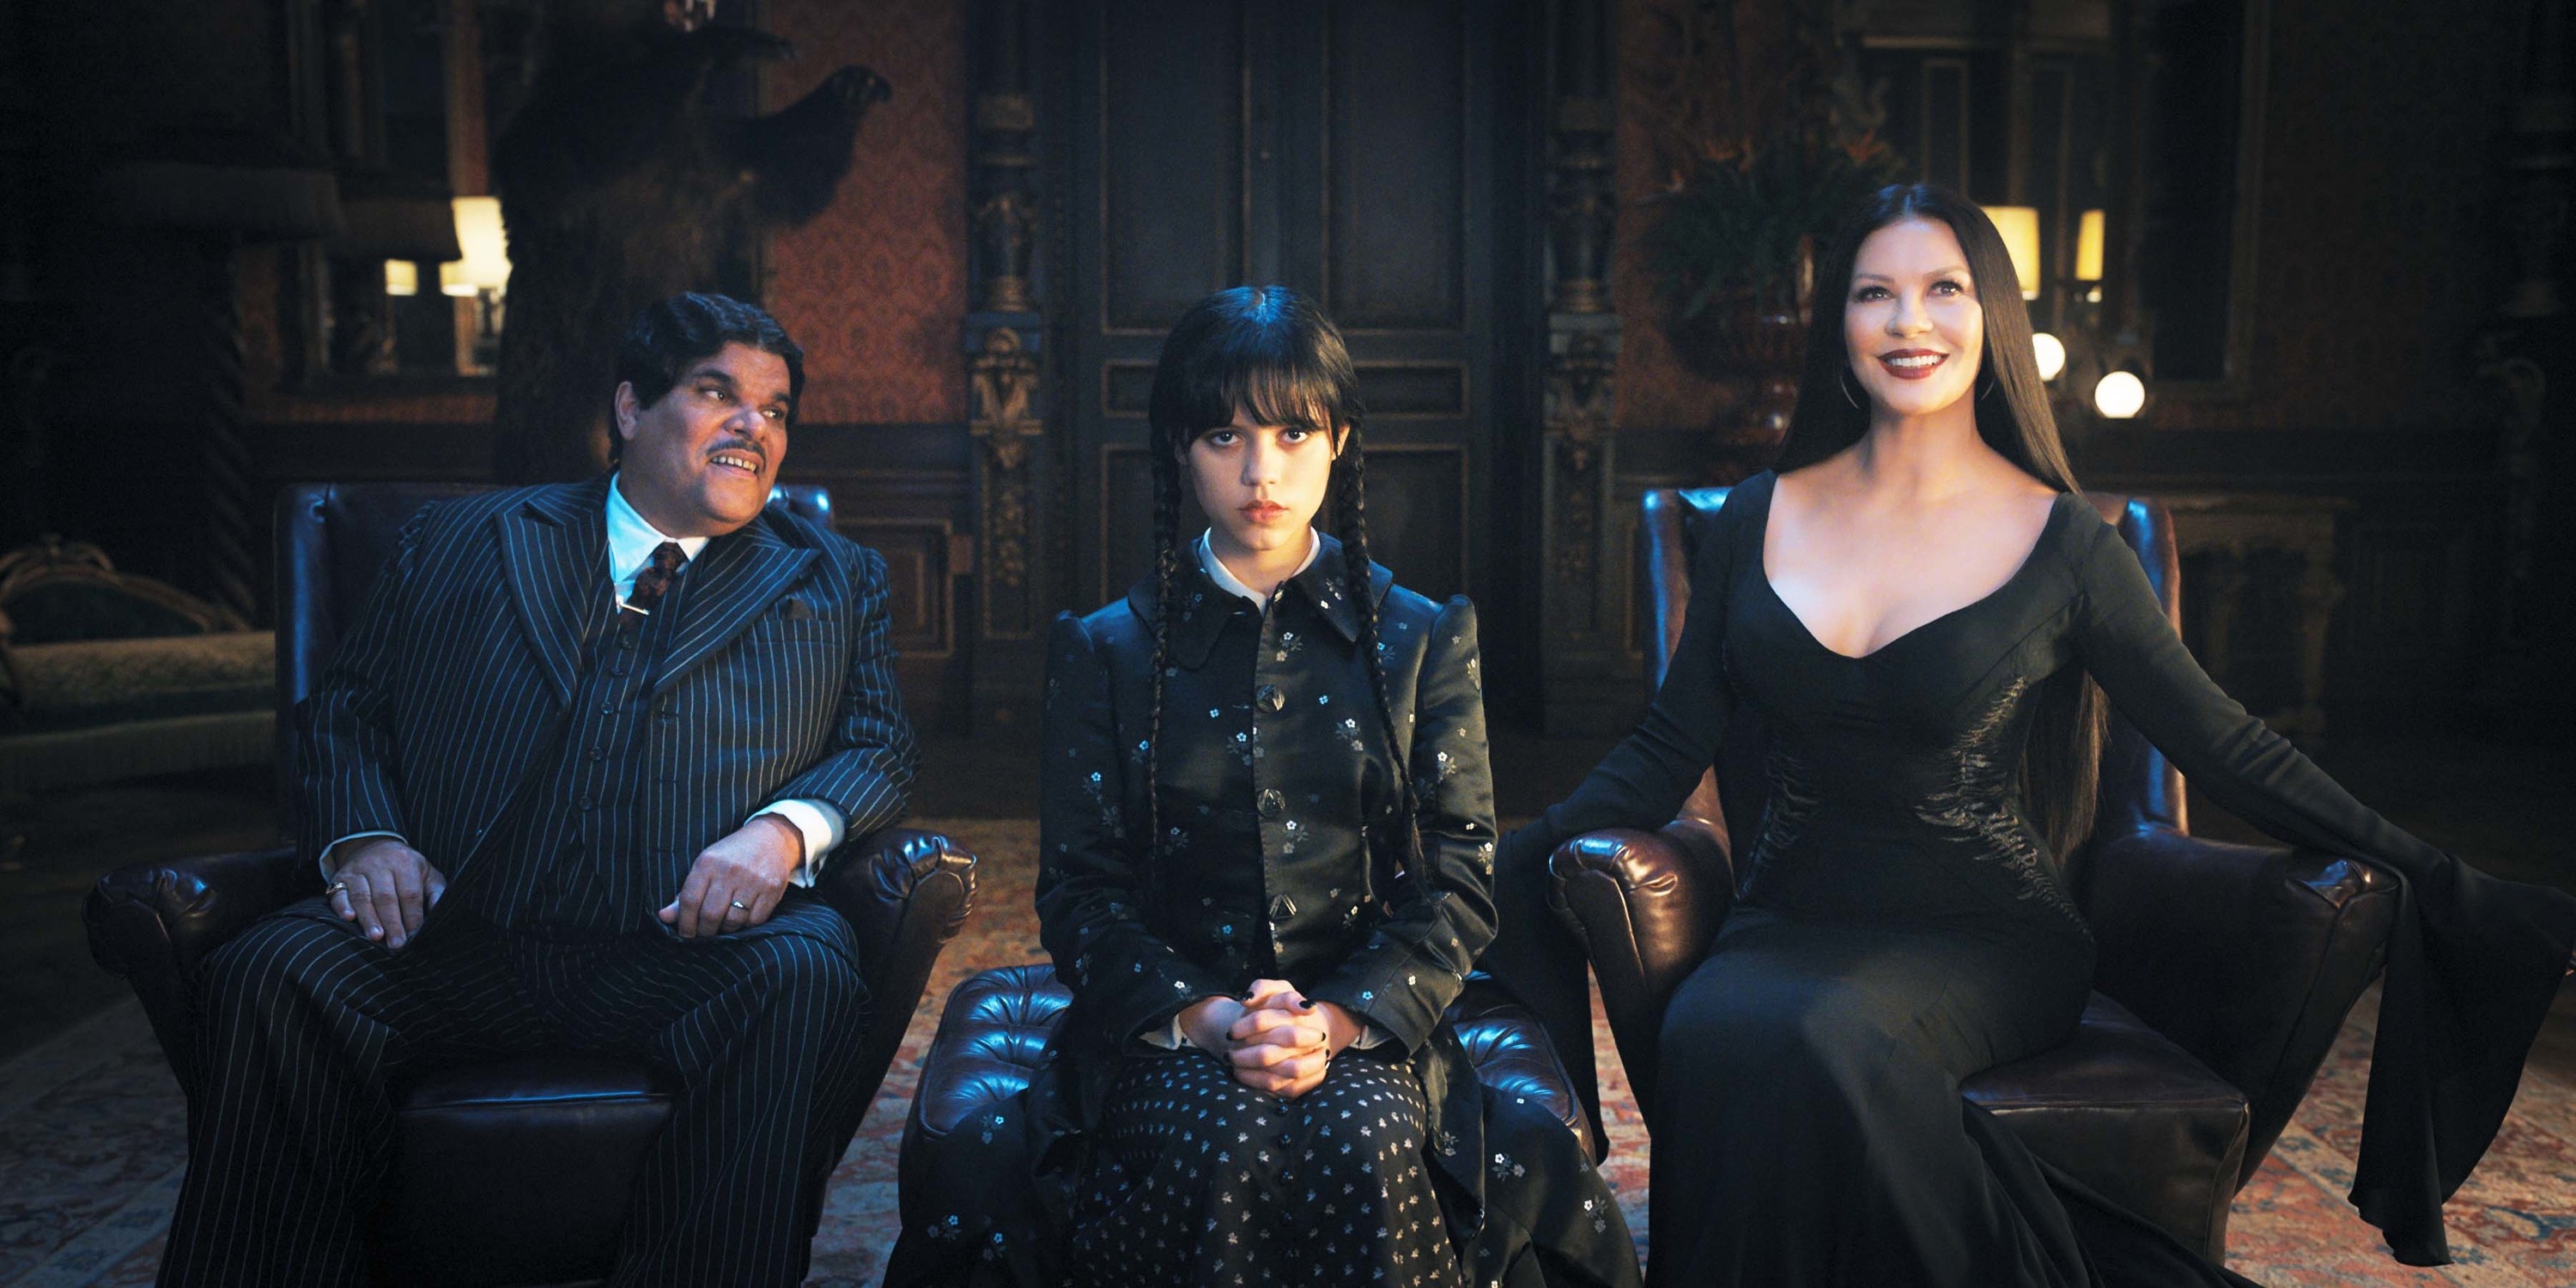 members of the Addams family sitting together with Wednesday in the middle